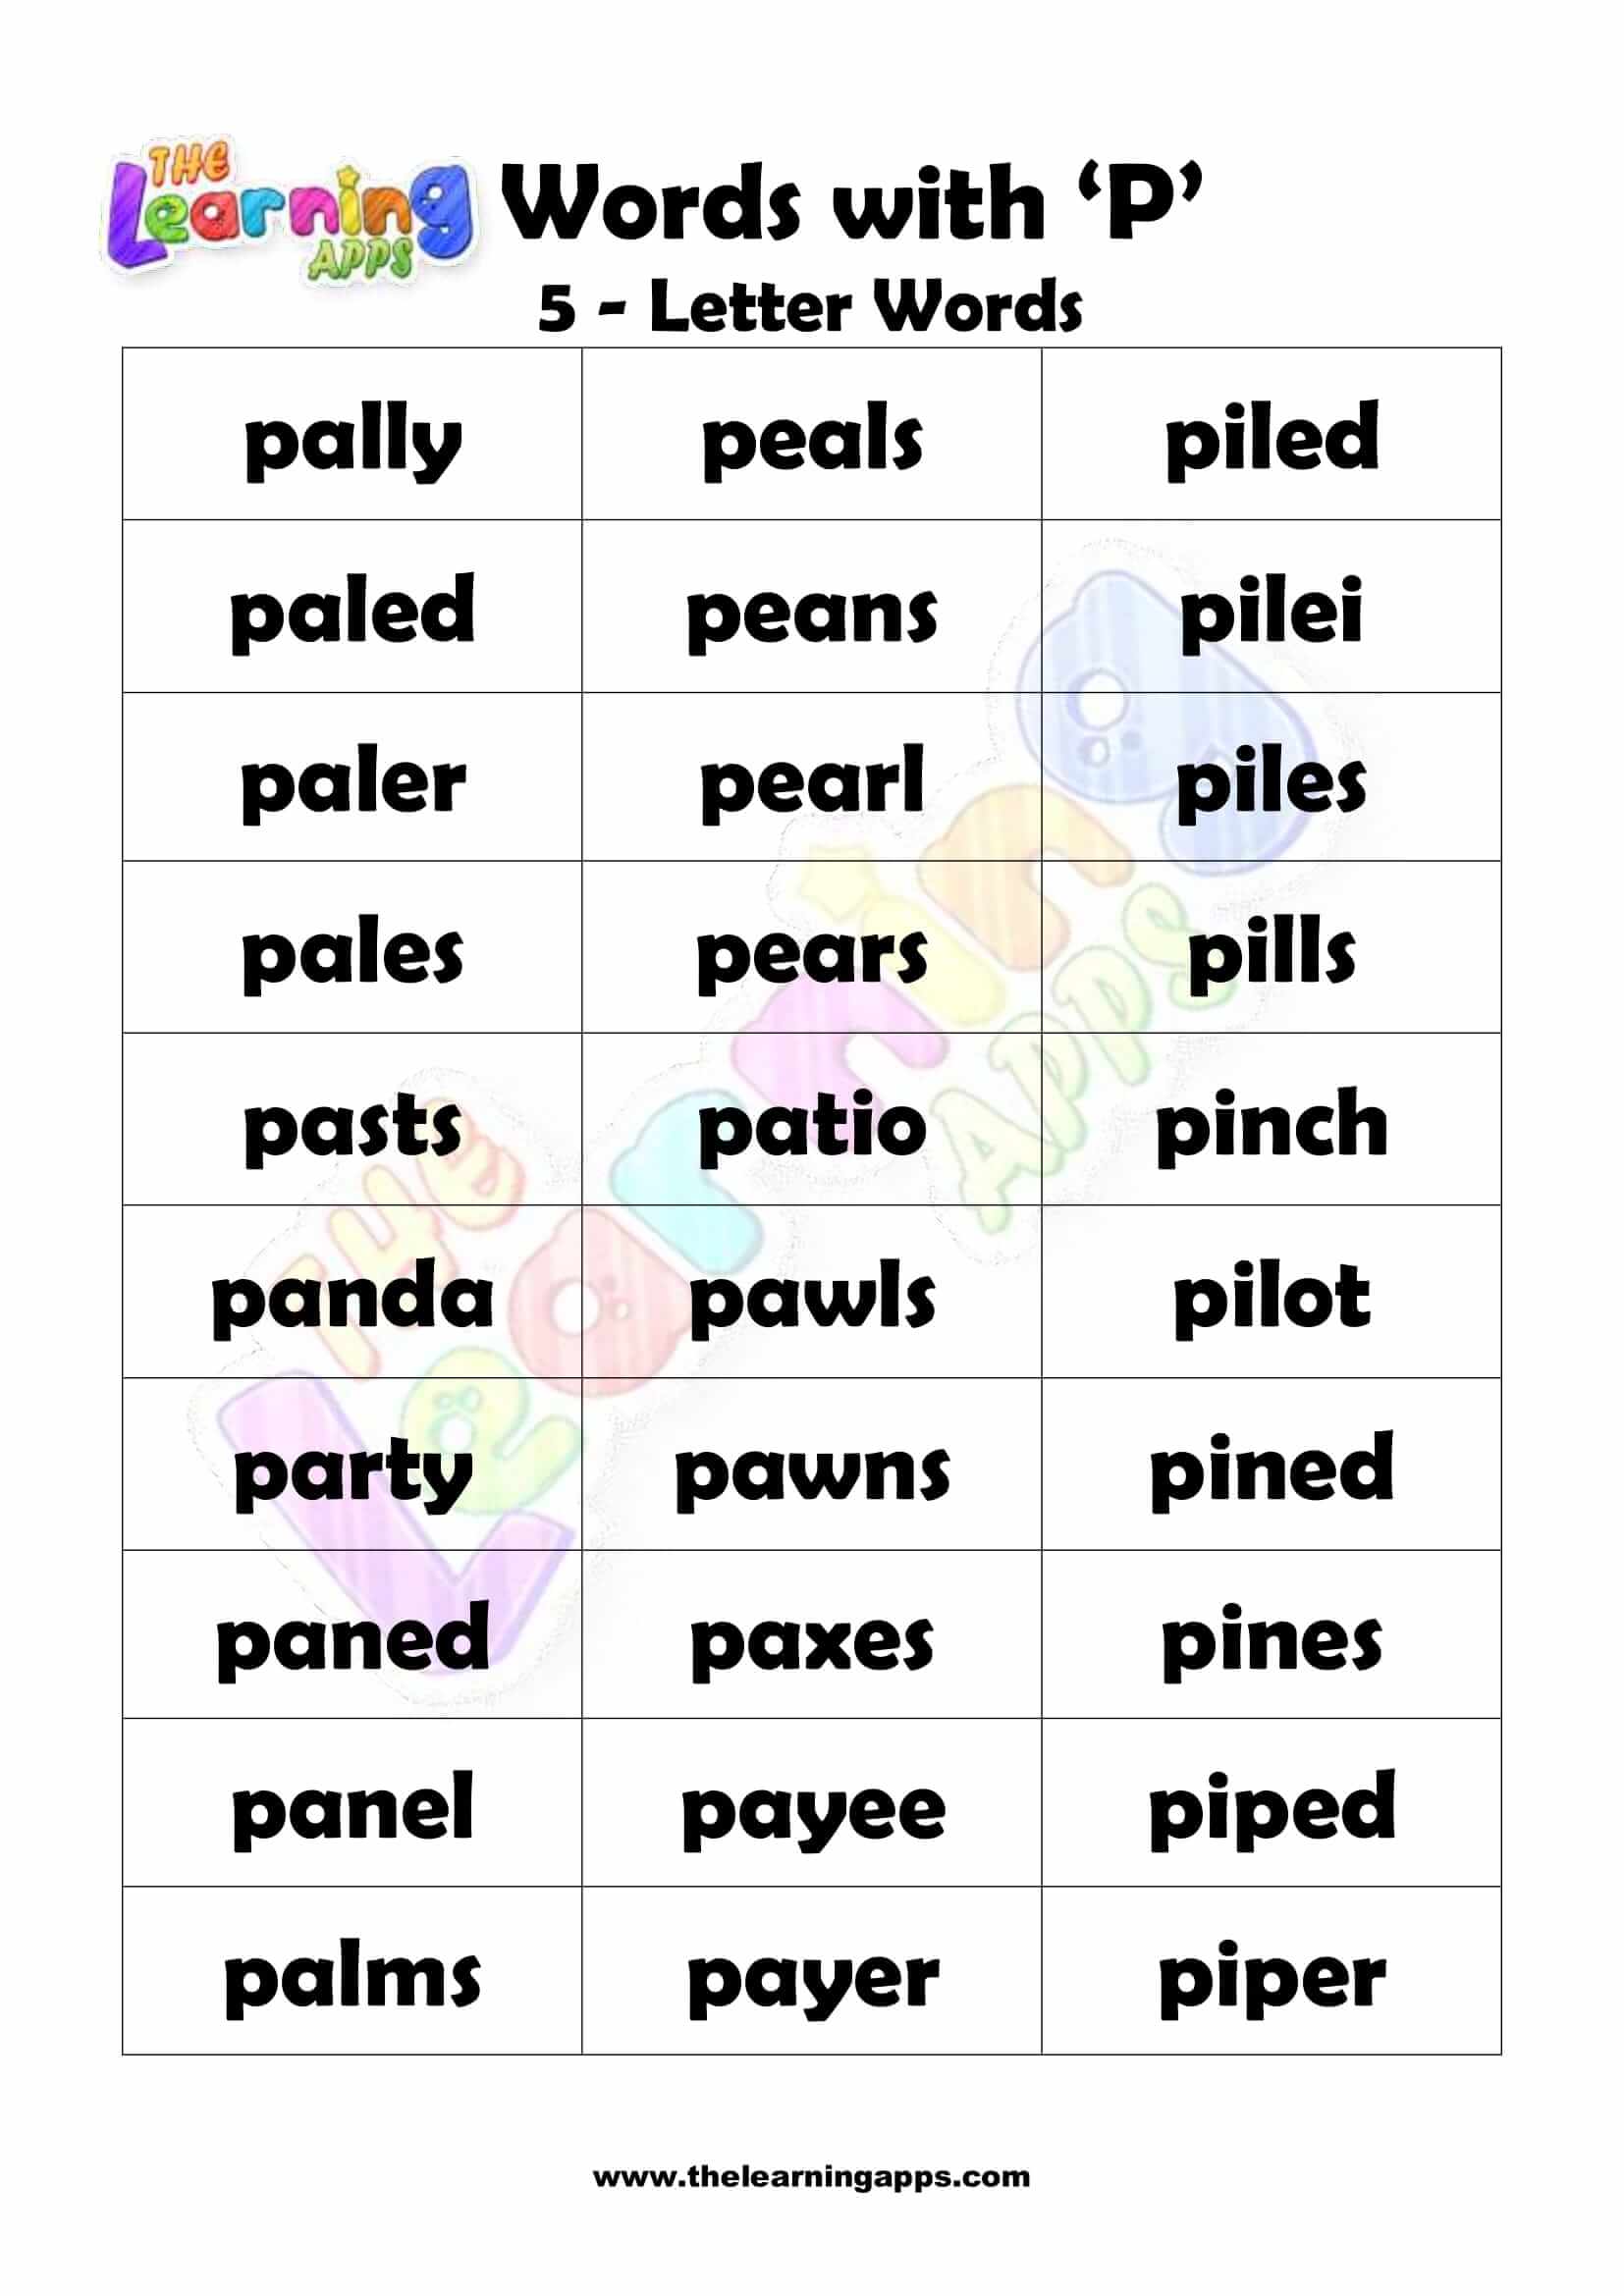 5 LETTER WORD STARTING WITH P-2